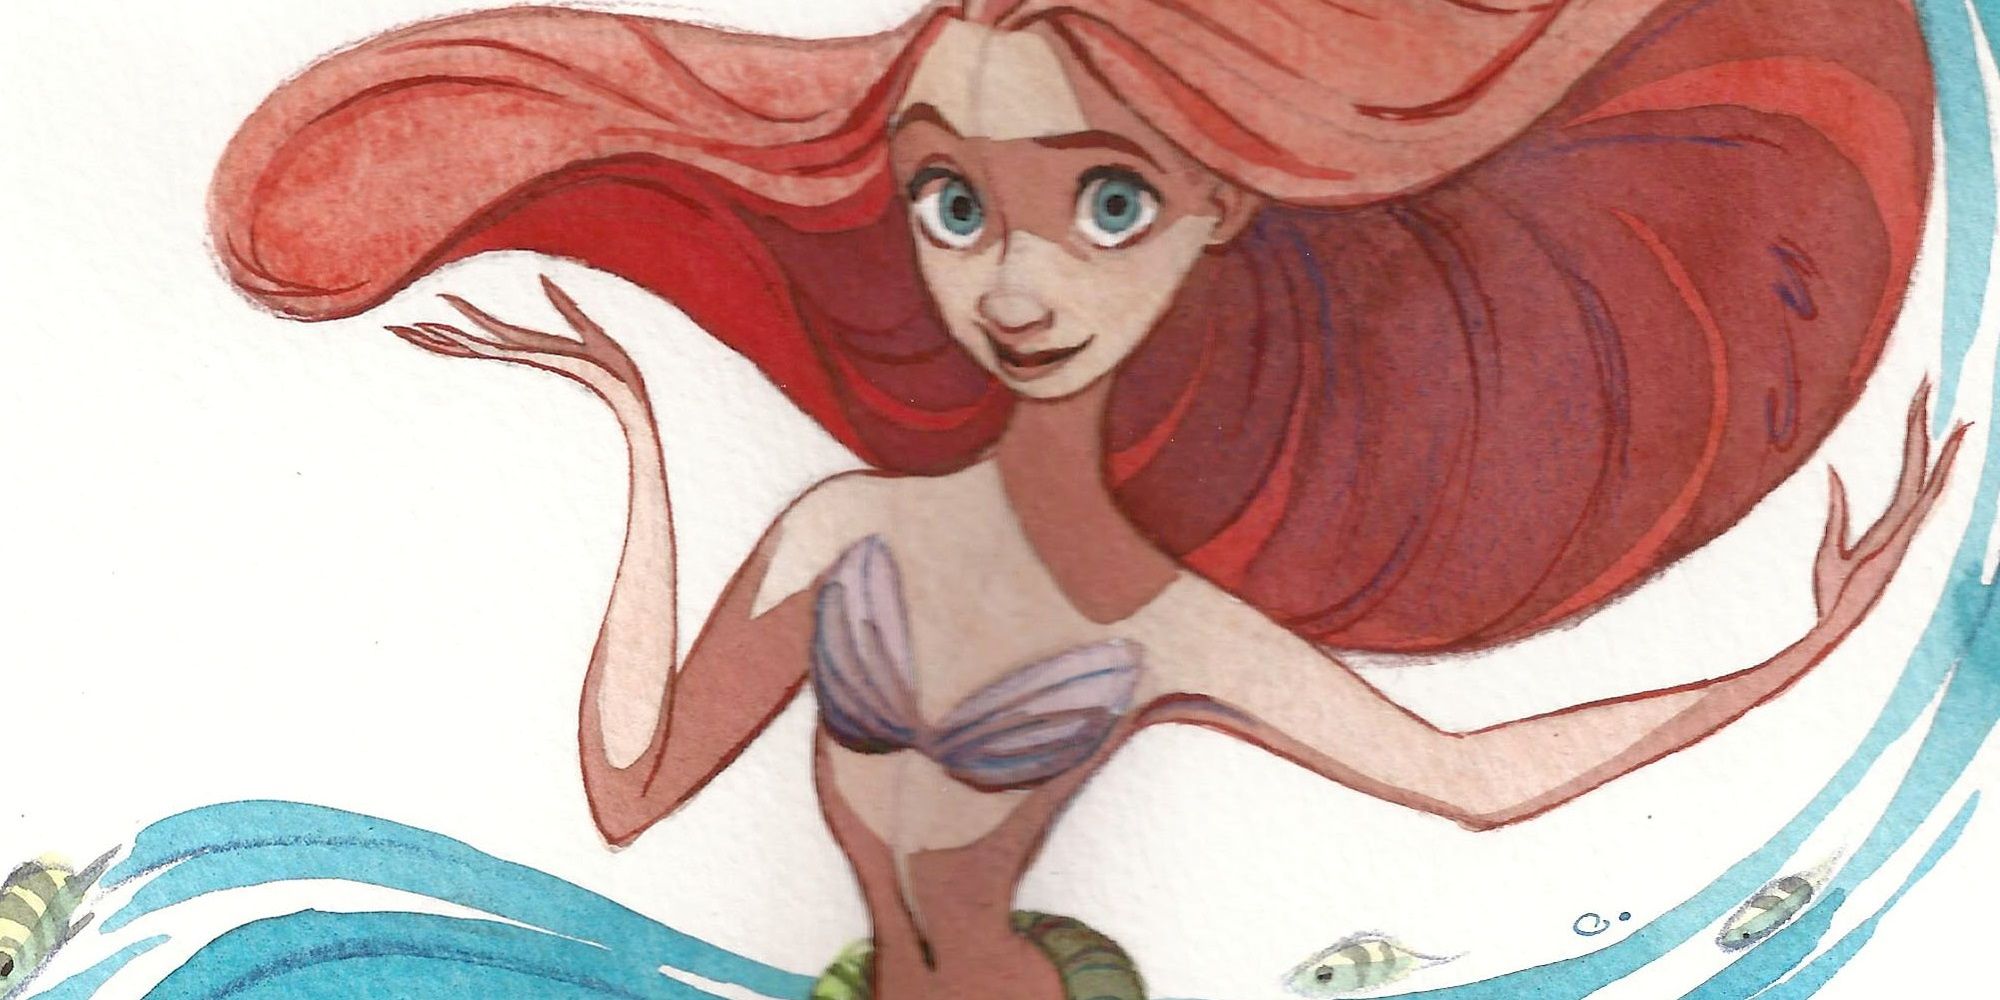 The Little Mermaid - Under the Sea by Cecile Carre - cropped